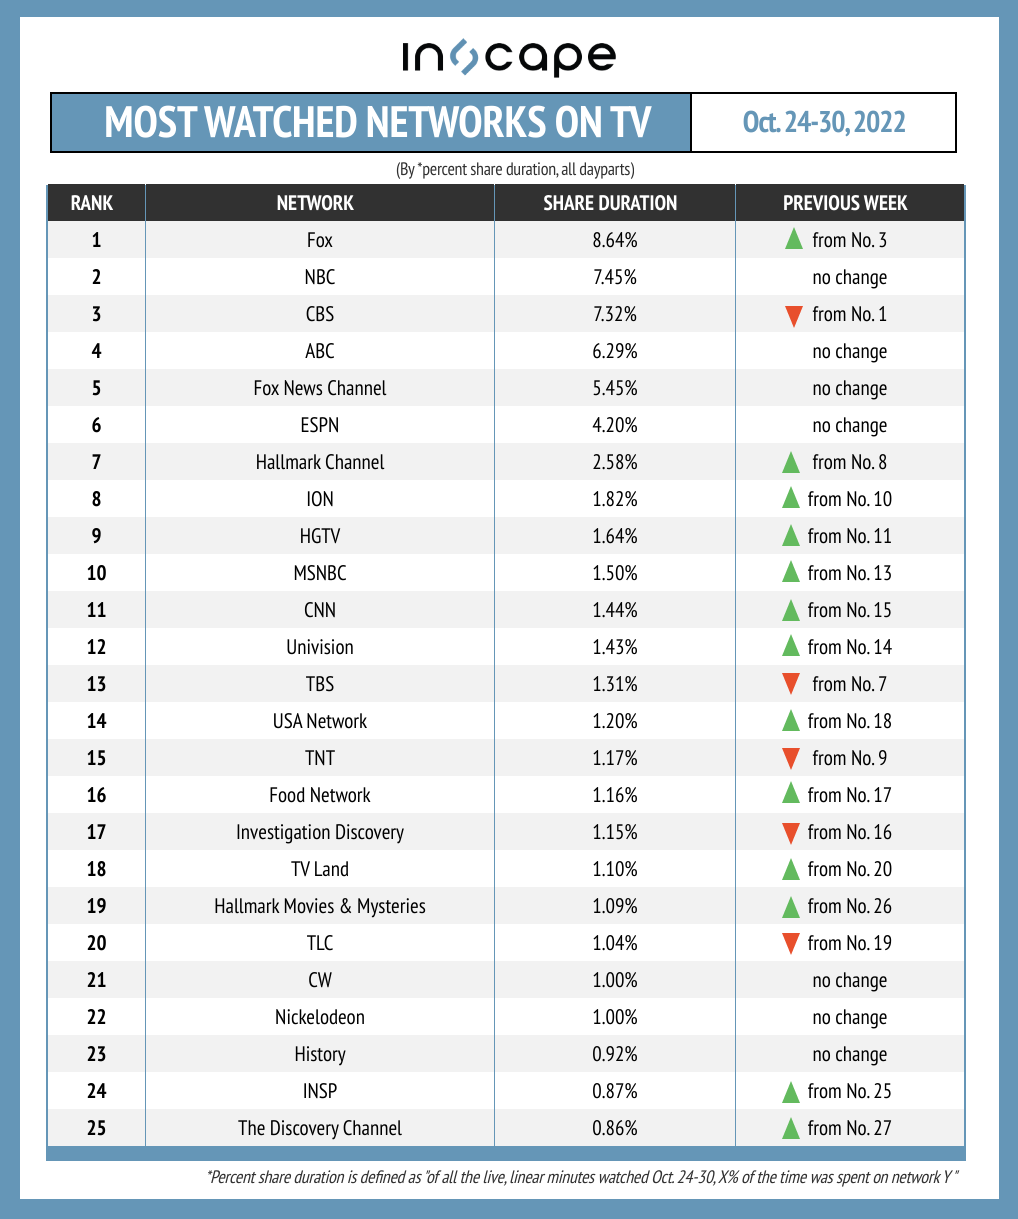 Most watched networks on TV by shared duration in percent from October 24th to 30th.